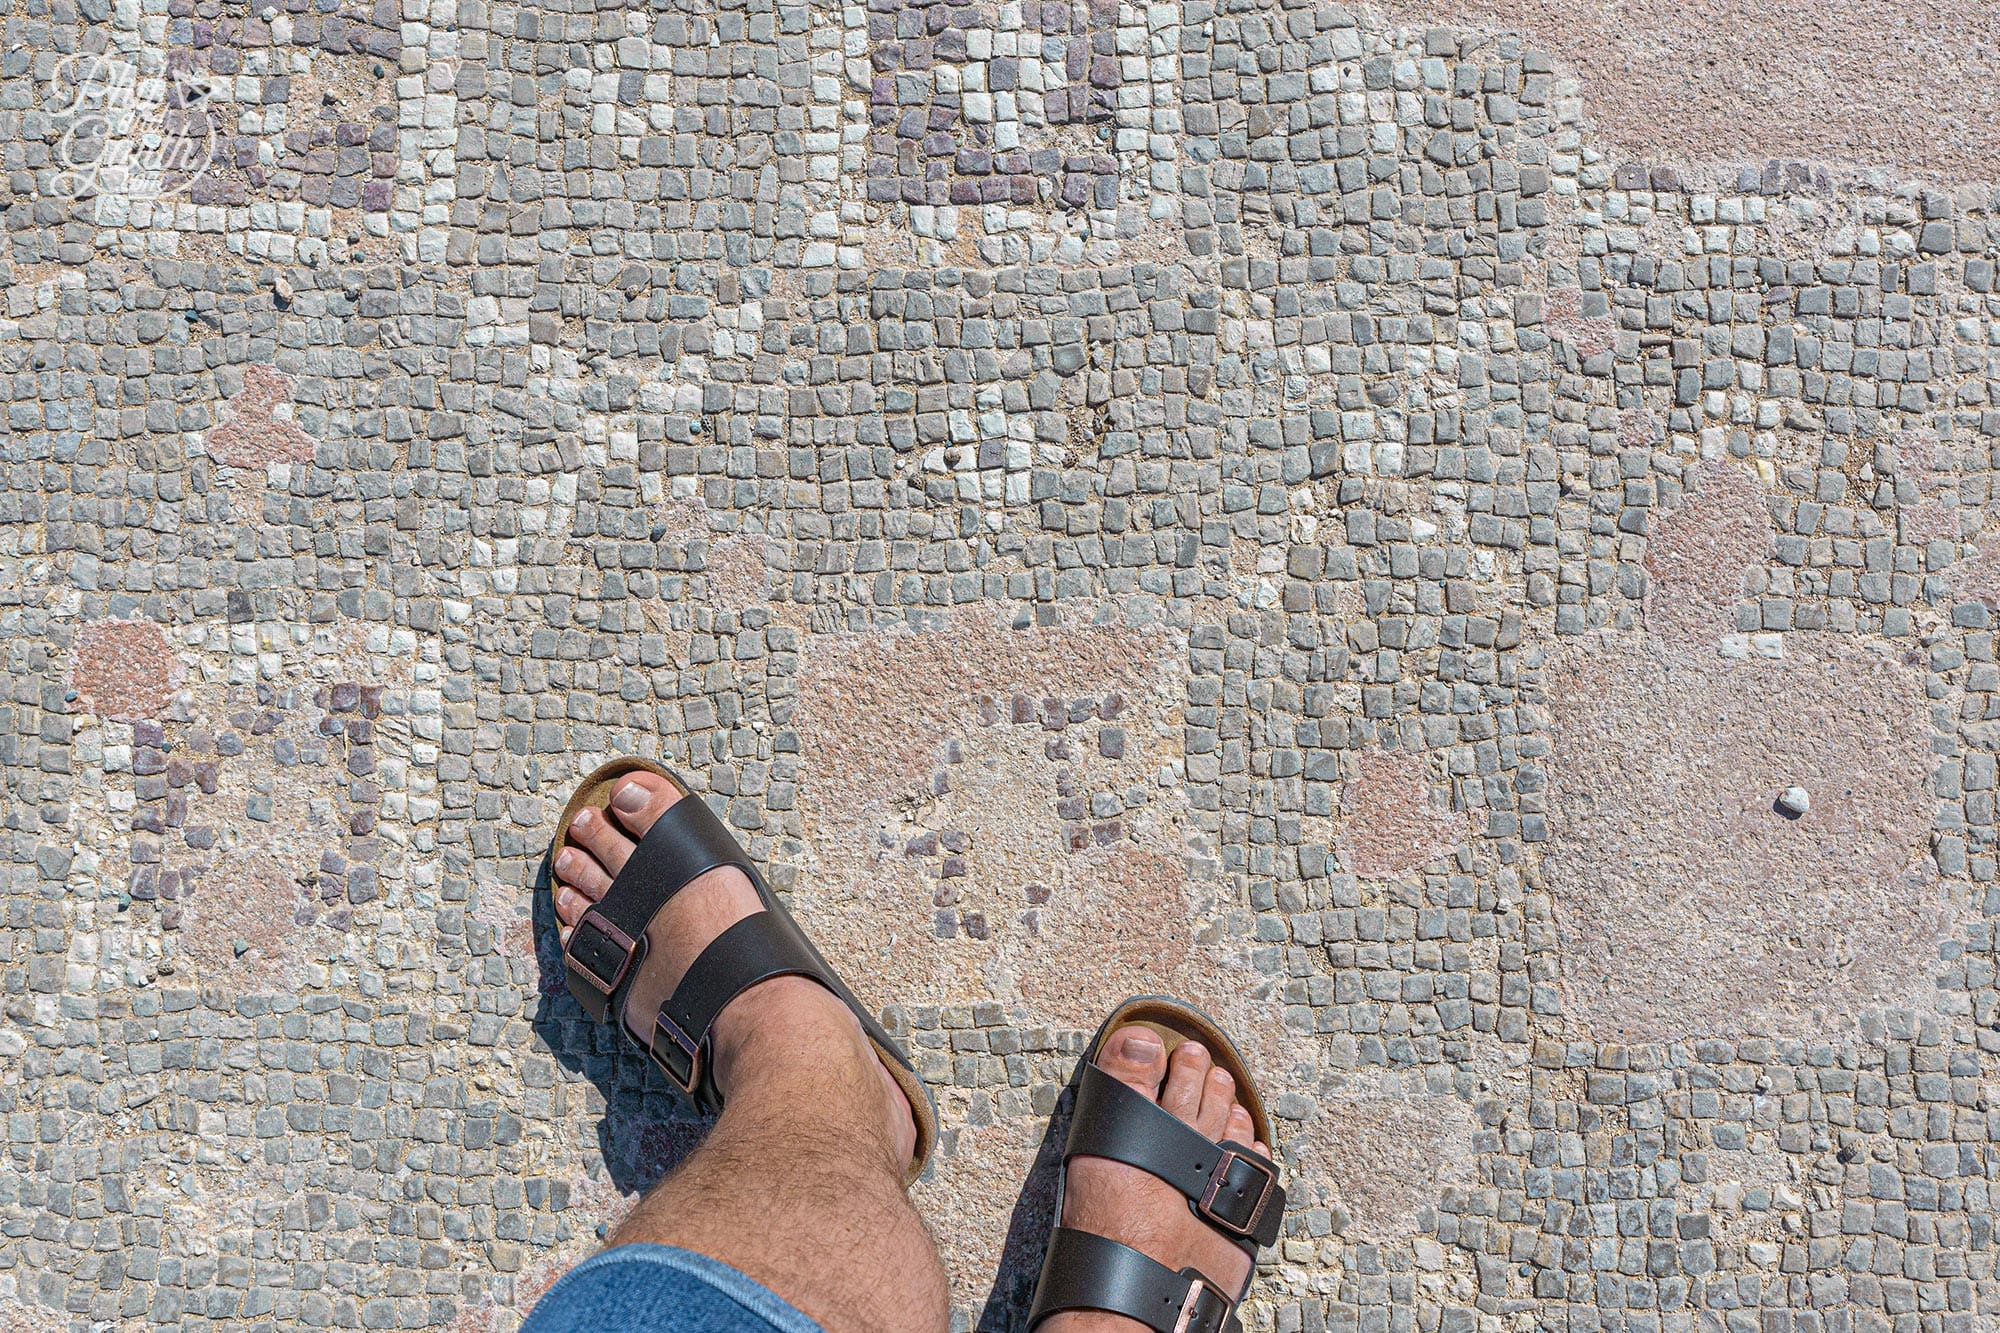 You can even walk on the mosaics on the footpaths outside the House of Theseus